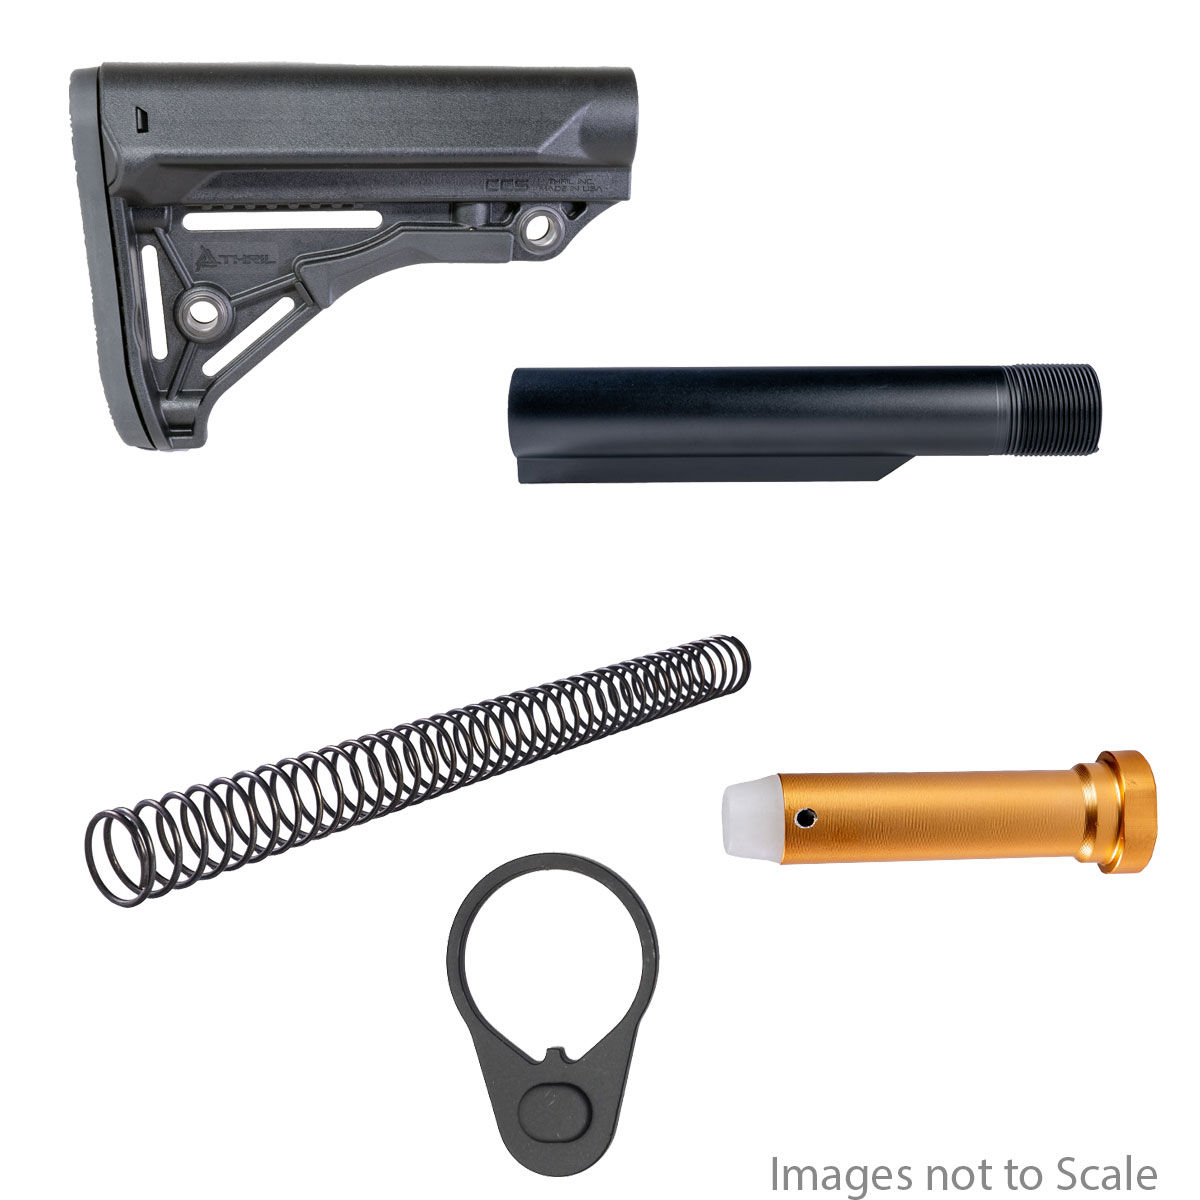 Buffer Tube Kit: THRIL Combat Competition Stock + Recoil Tech. Mil-Spec Heavy-Duty 6-Position Buffer Tube  + Recoil Tech. AR-15 Carbine Recoil Spring + US Tactical Mil-Spec Receiver End Plate + Recoil Tech. AR-15 Standard Carbine Buffer